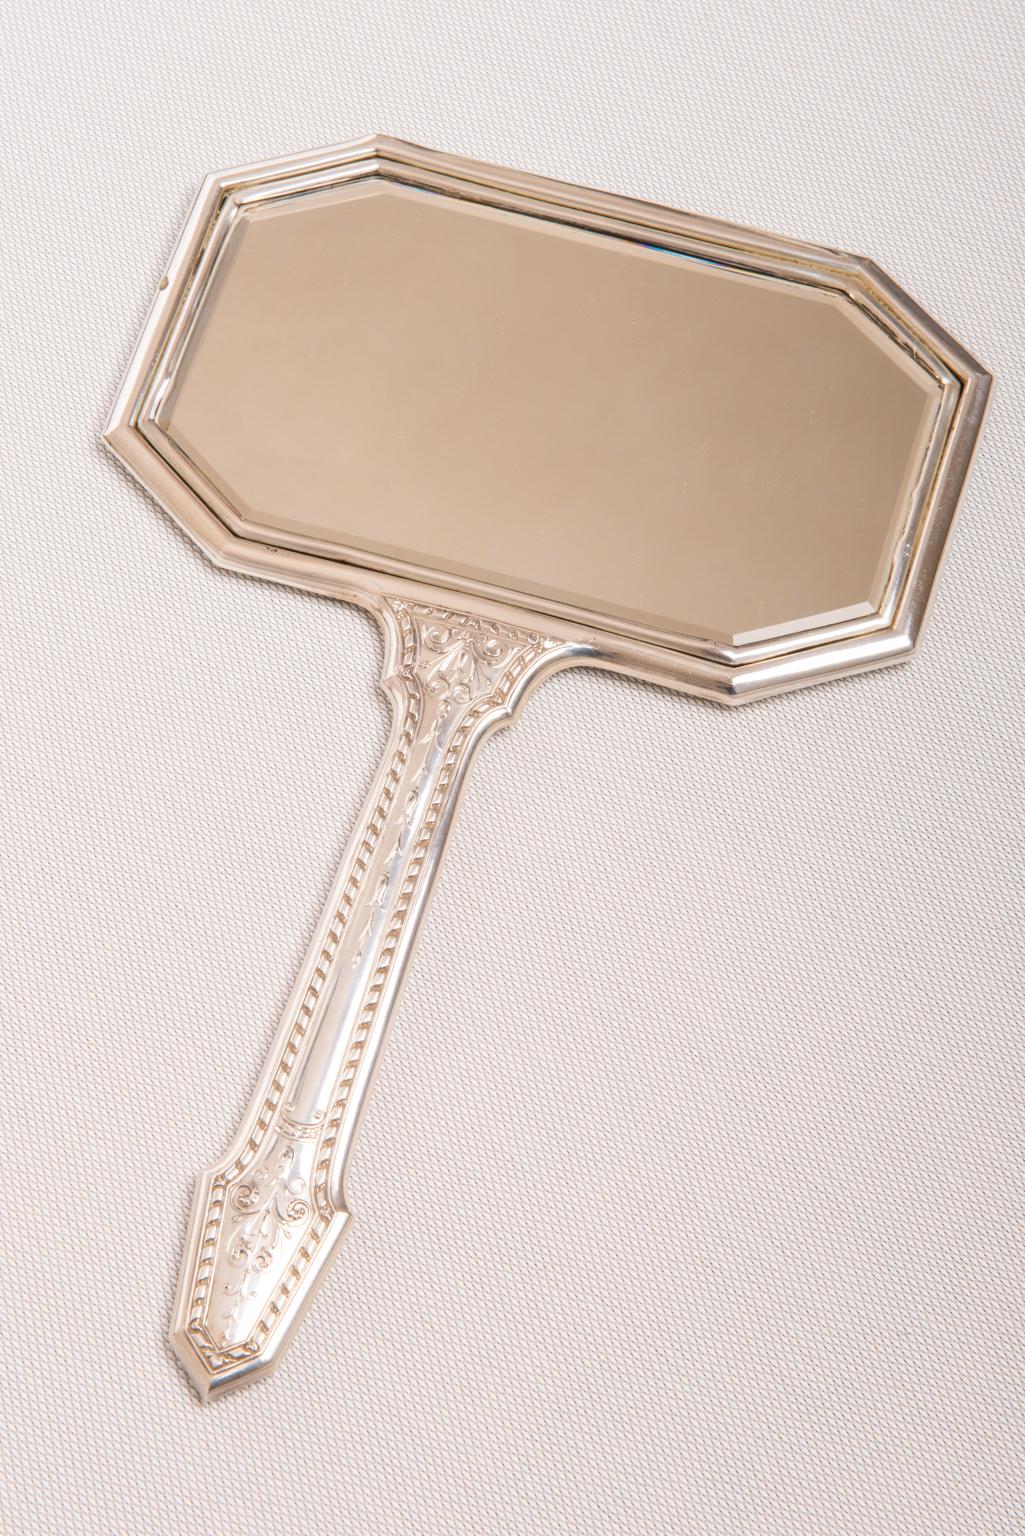 American Unusual Form for Silver USA Mirror with Handle For Sale